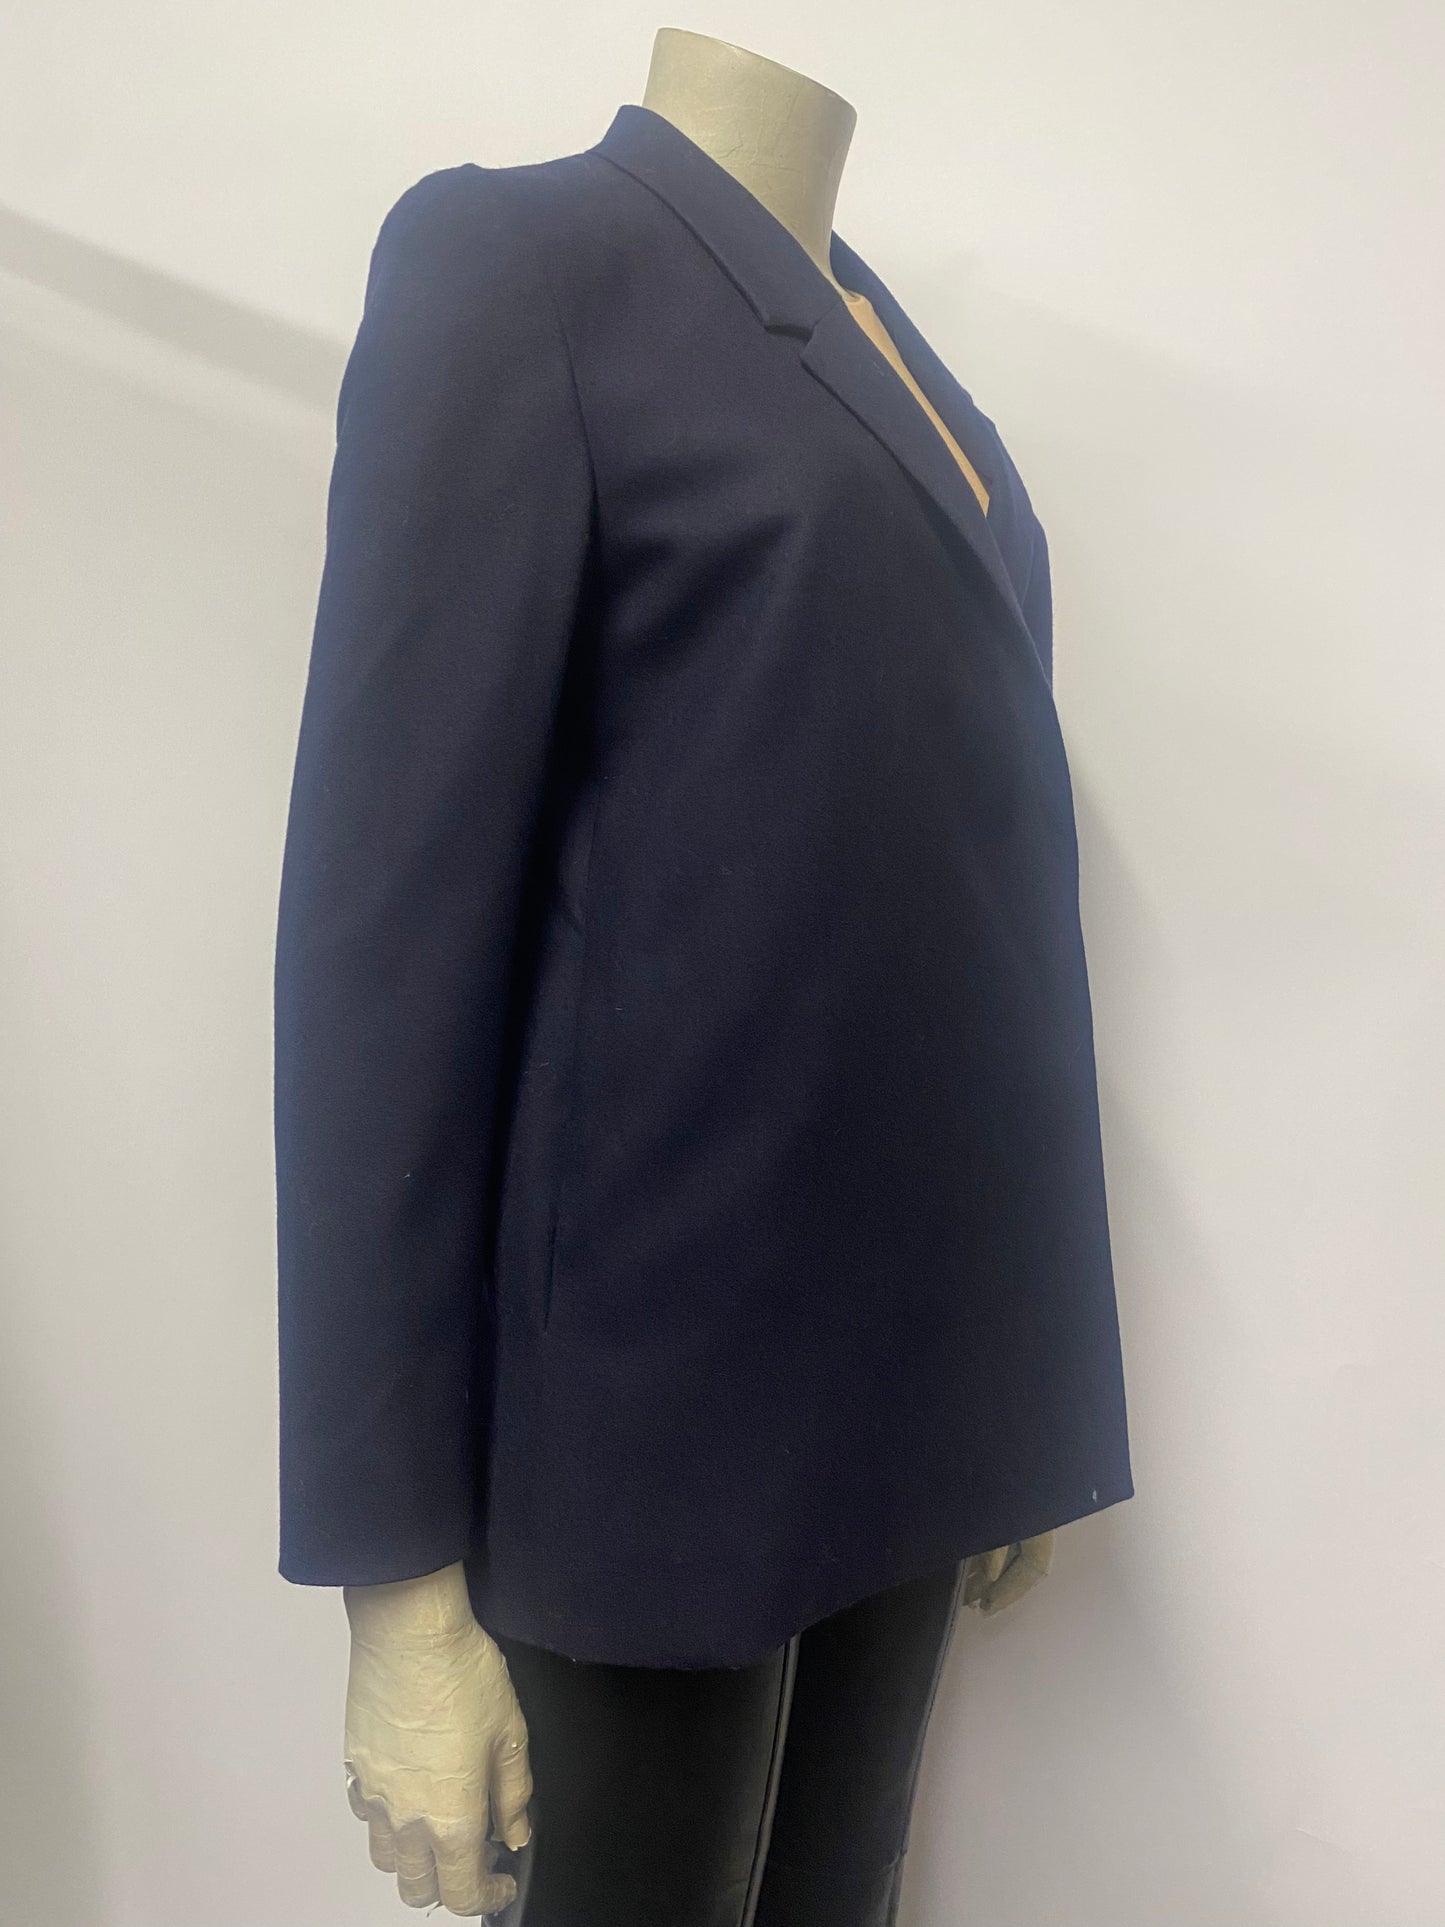 COS Navy Wool Concealed Button Blazer Jacket 6